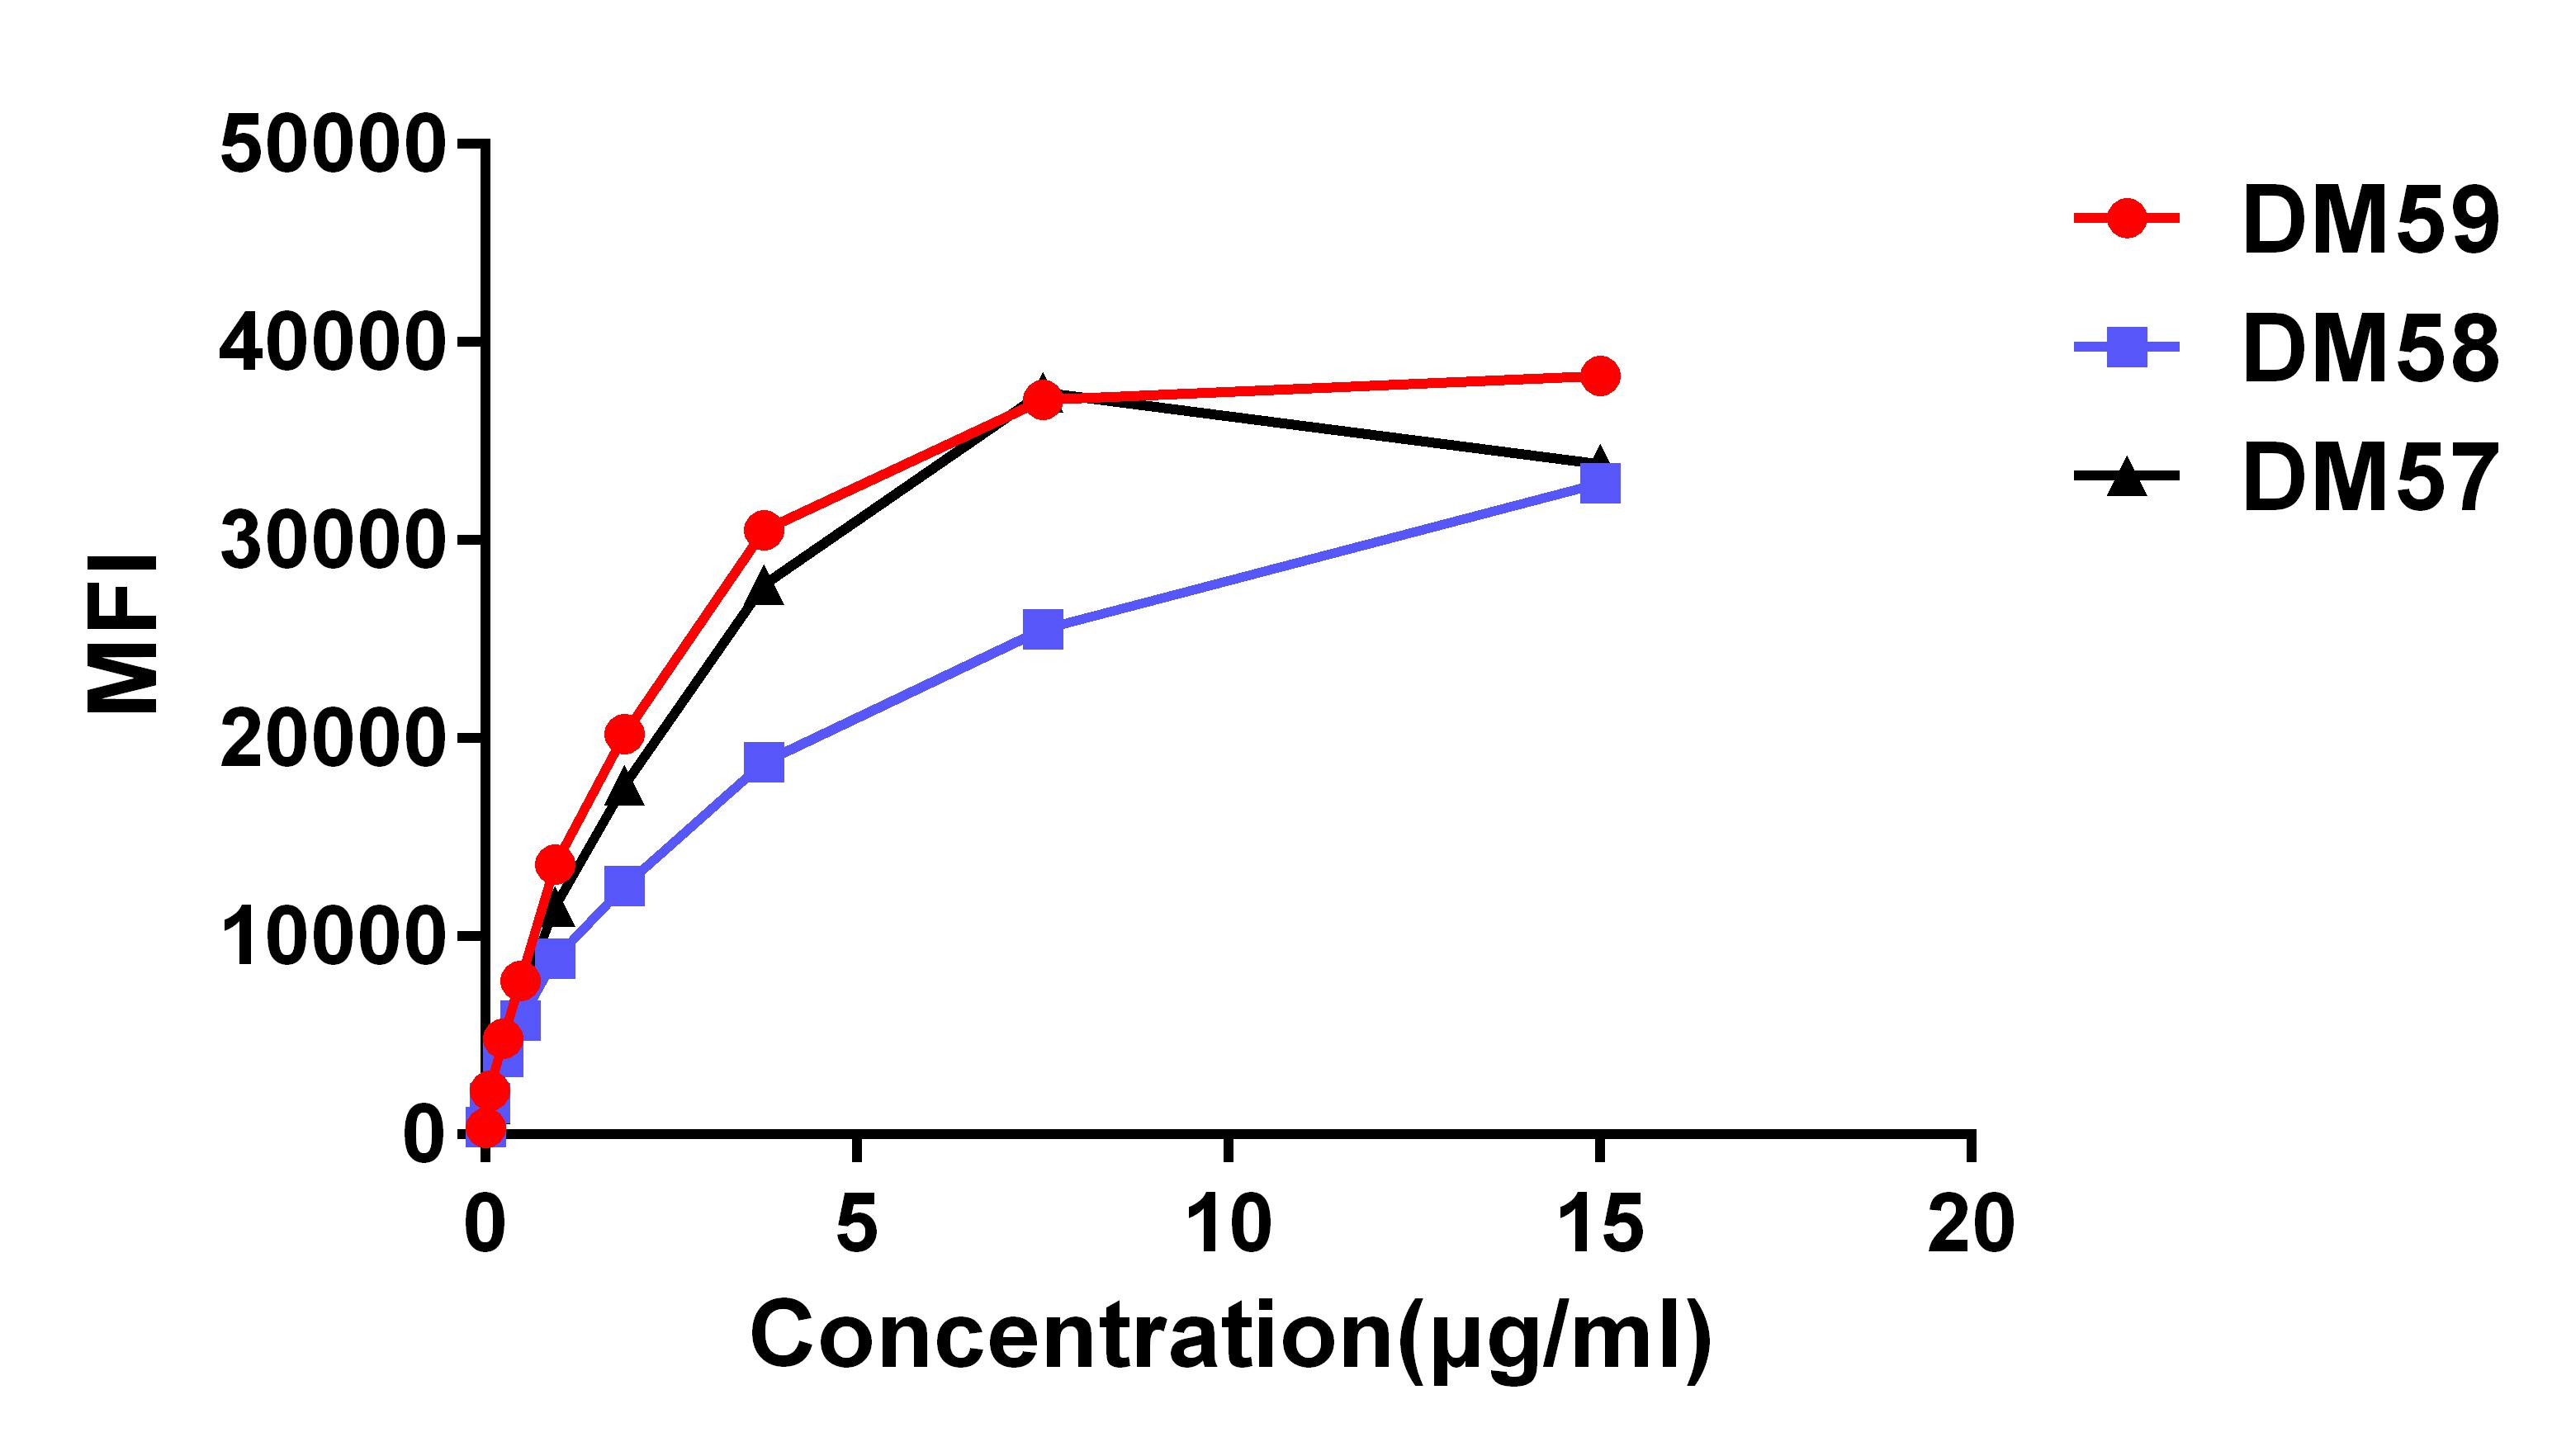 Figure 3. Affinity ranking of different Rabbit anti-CD27 mAb clones by titration of different concentration onto Raji cells. The Y-axis represents the mean fluorescence intensity (MFI) while the X-axis represents the concentration of IgG used.